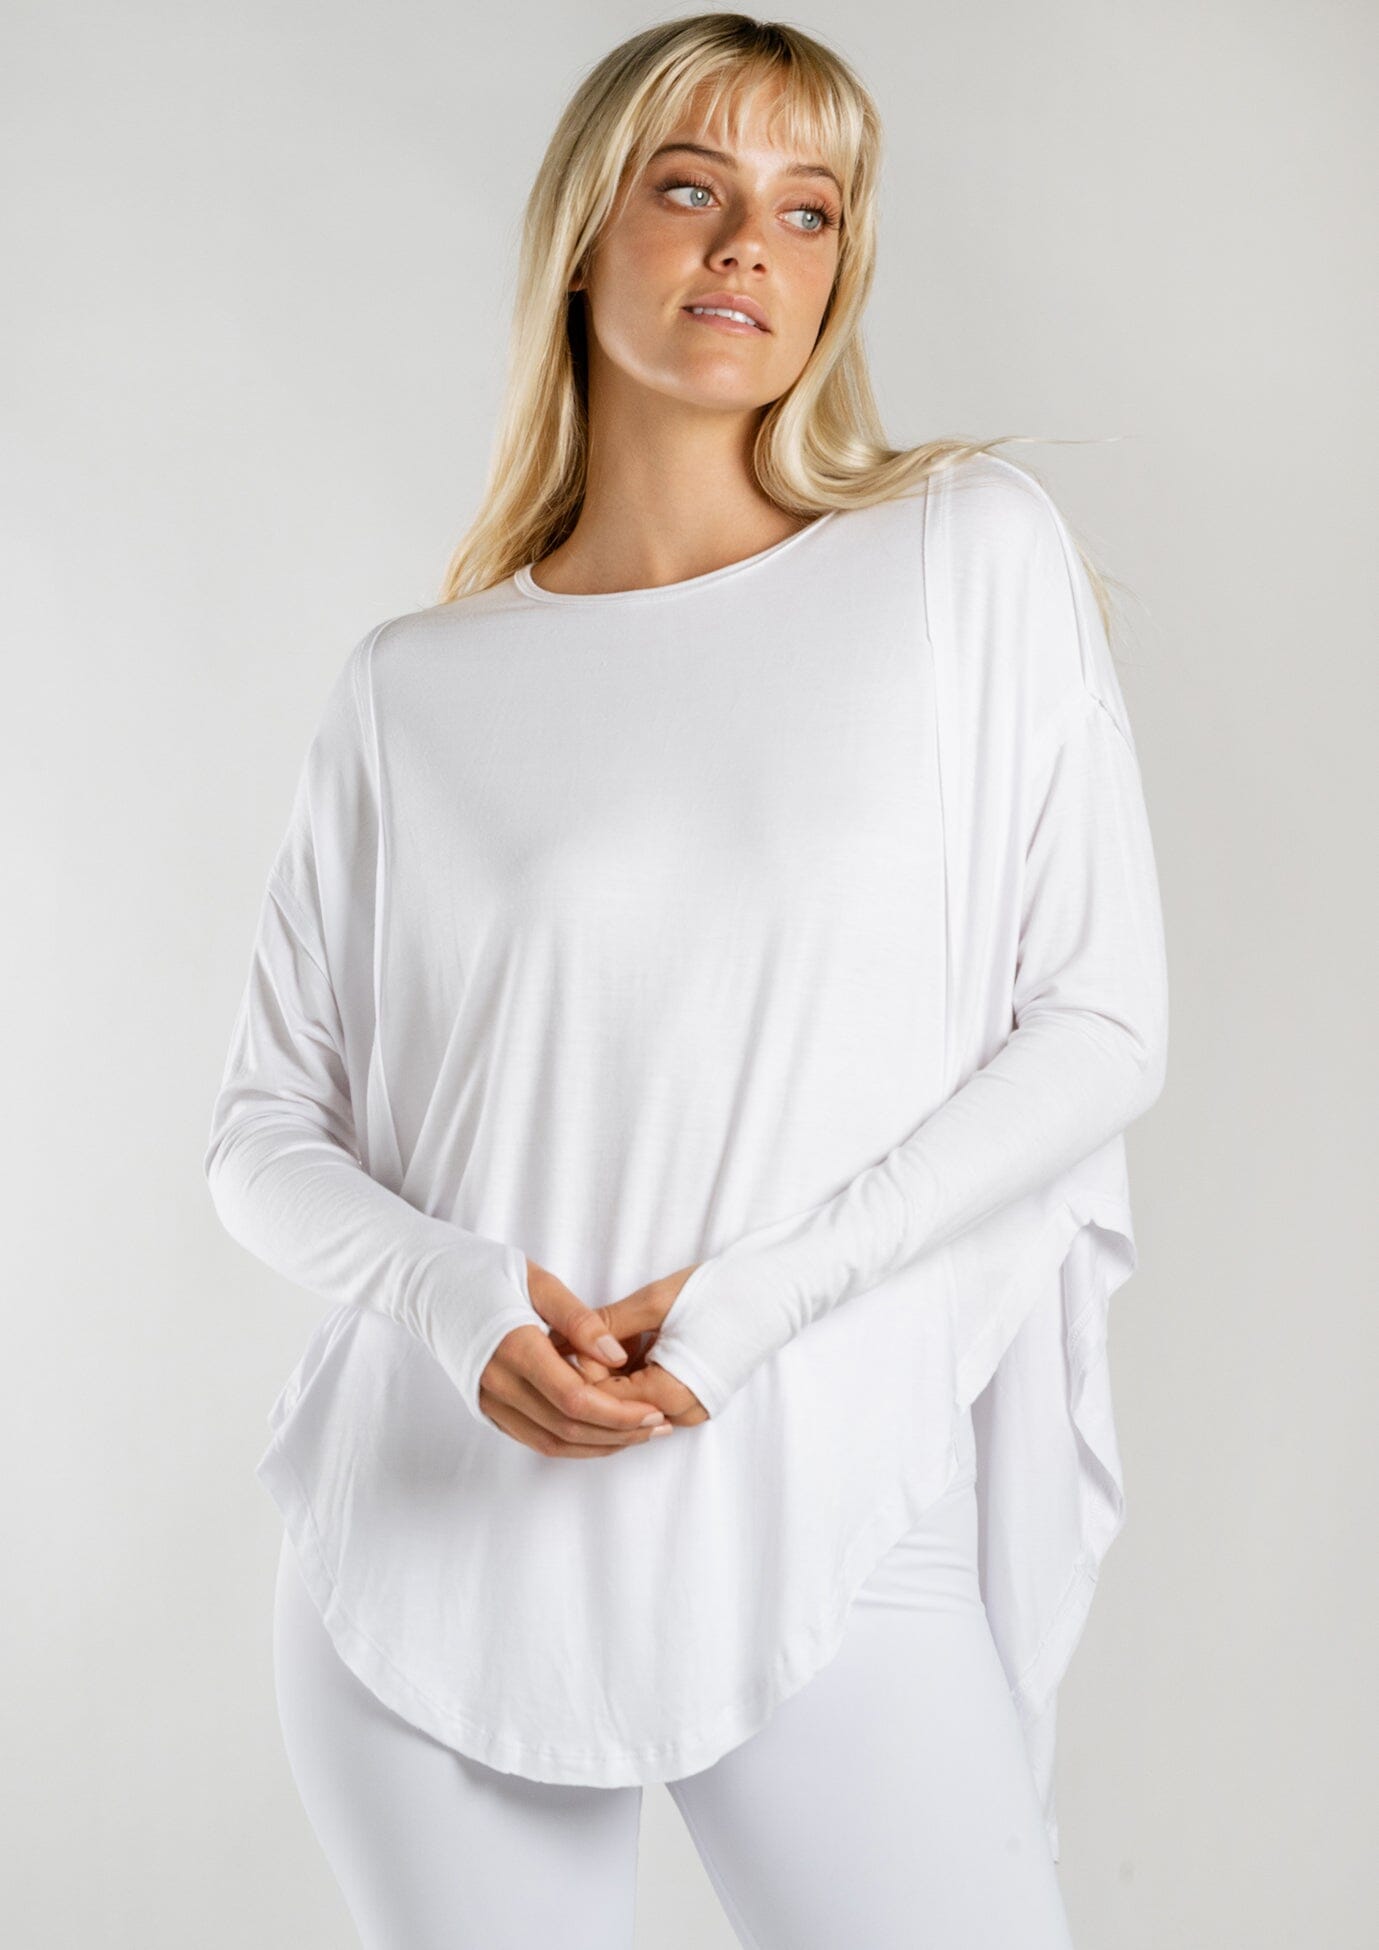 Flow Top in White by Jala